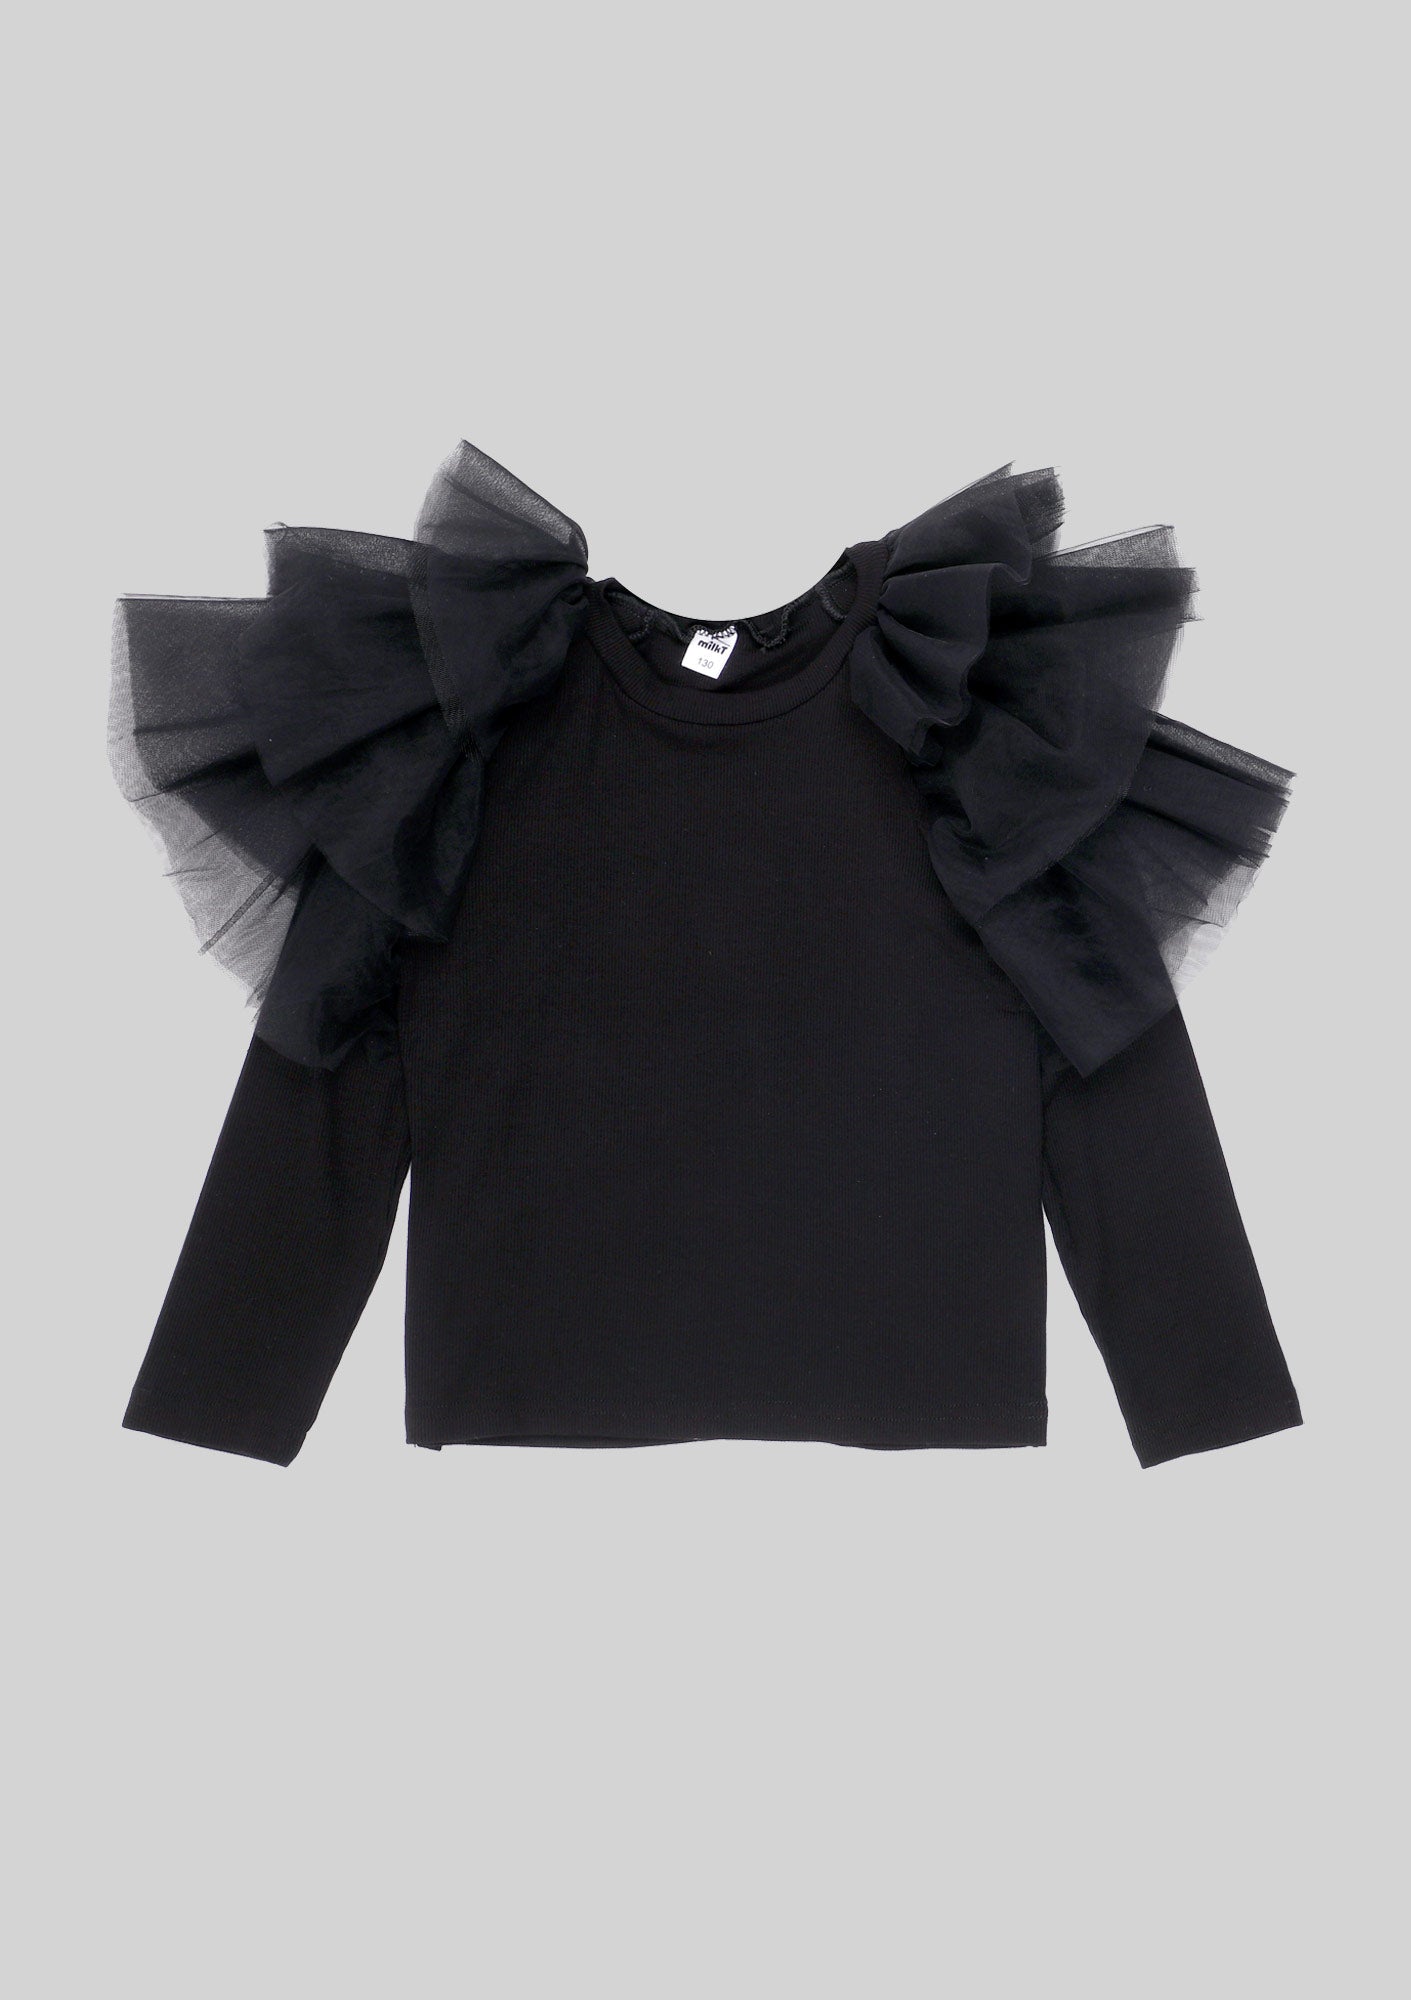 Tulle Ruffled Shoulder Top